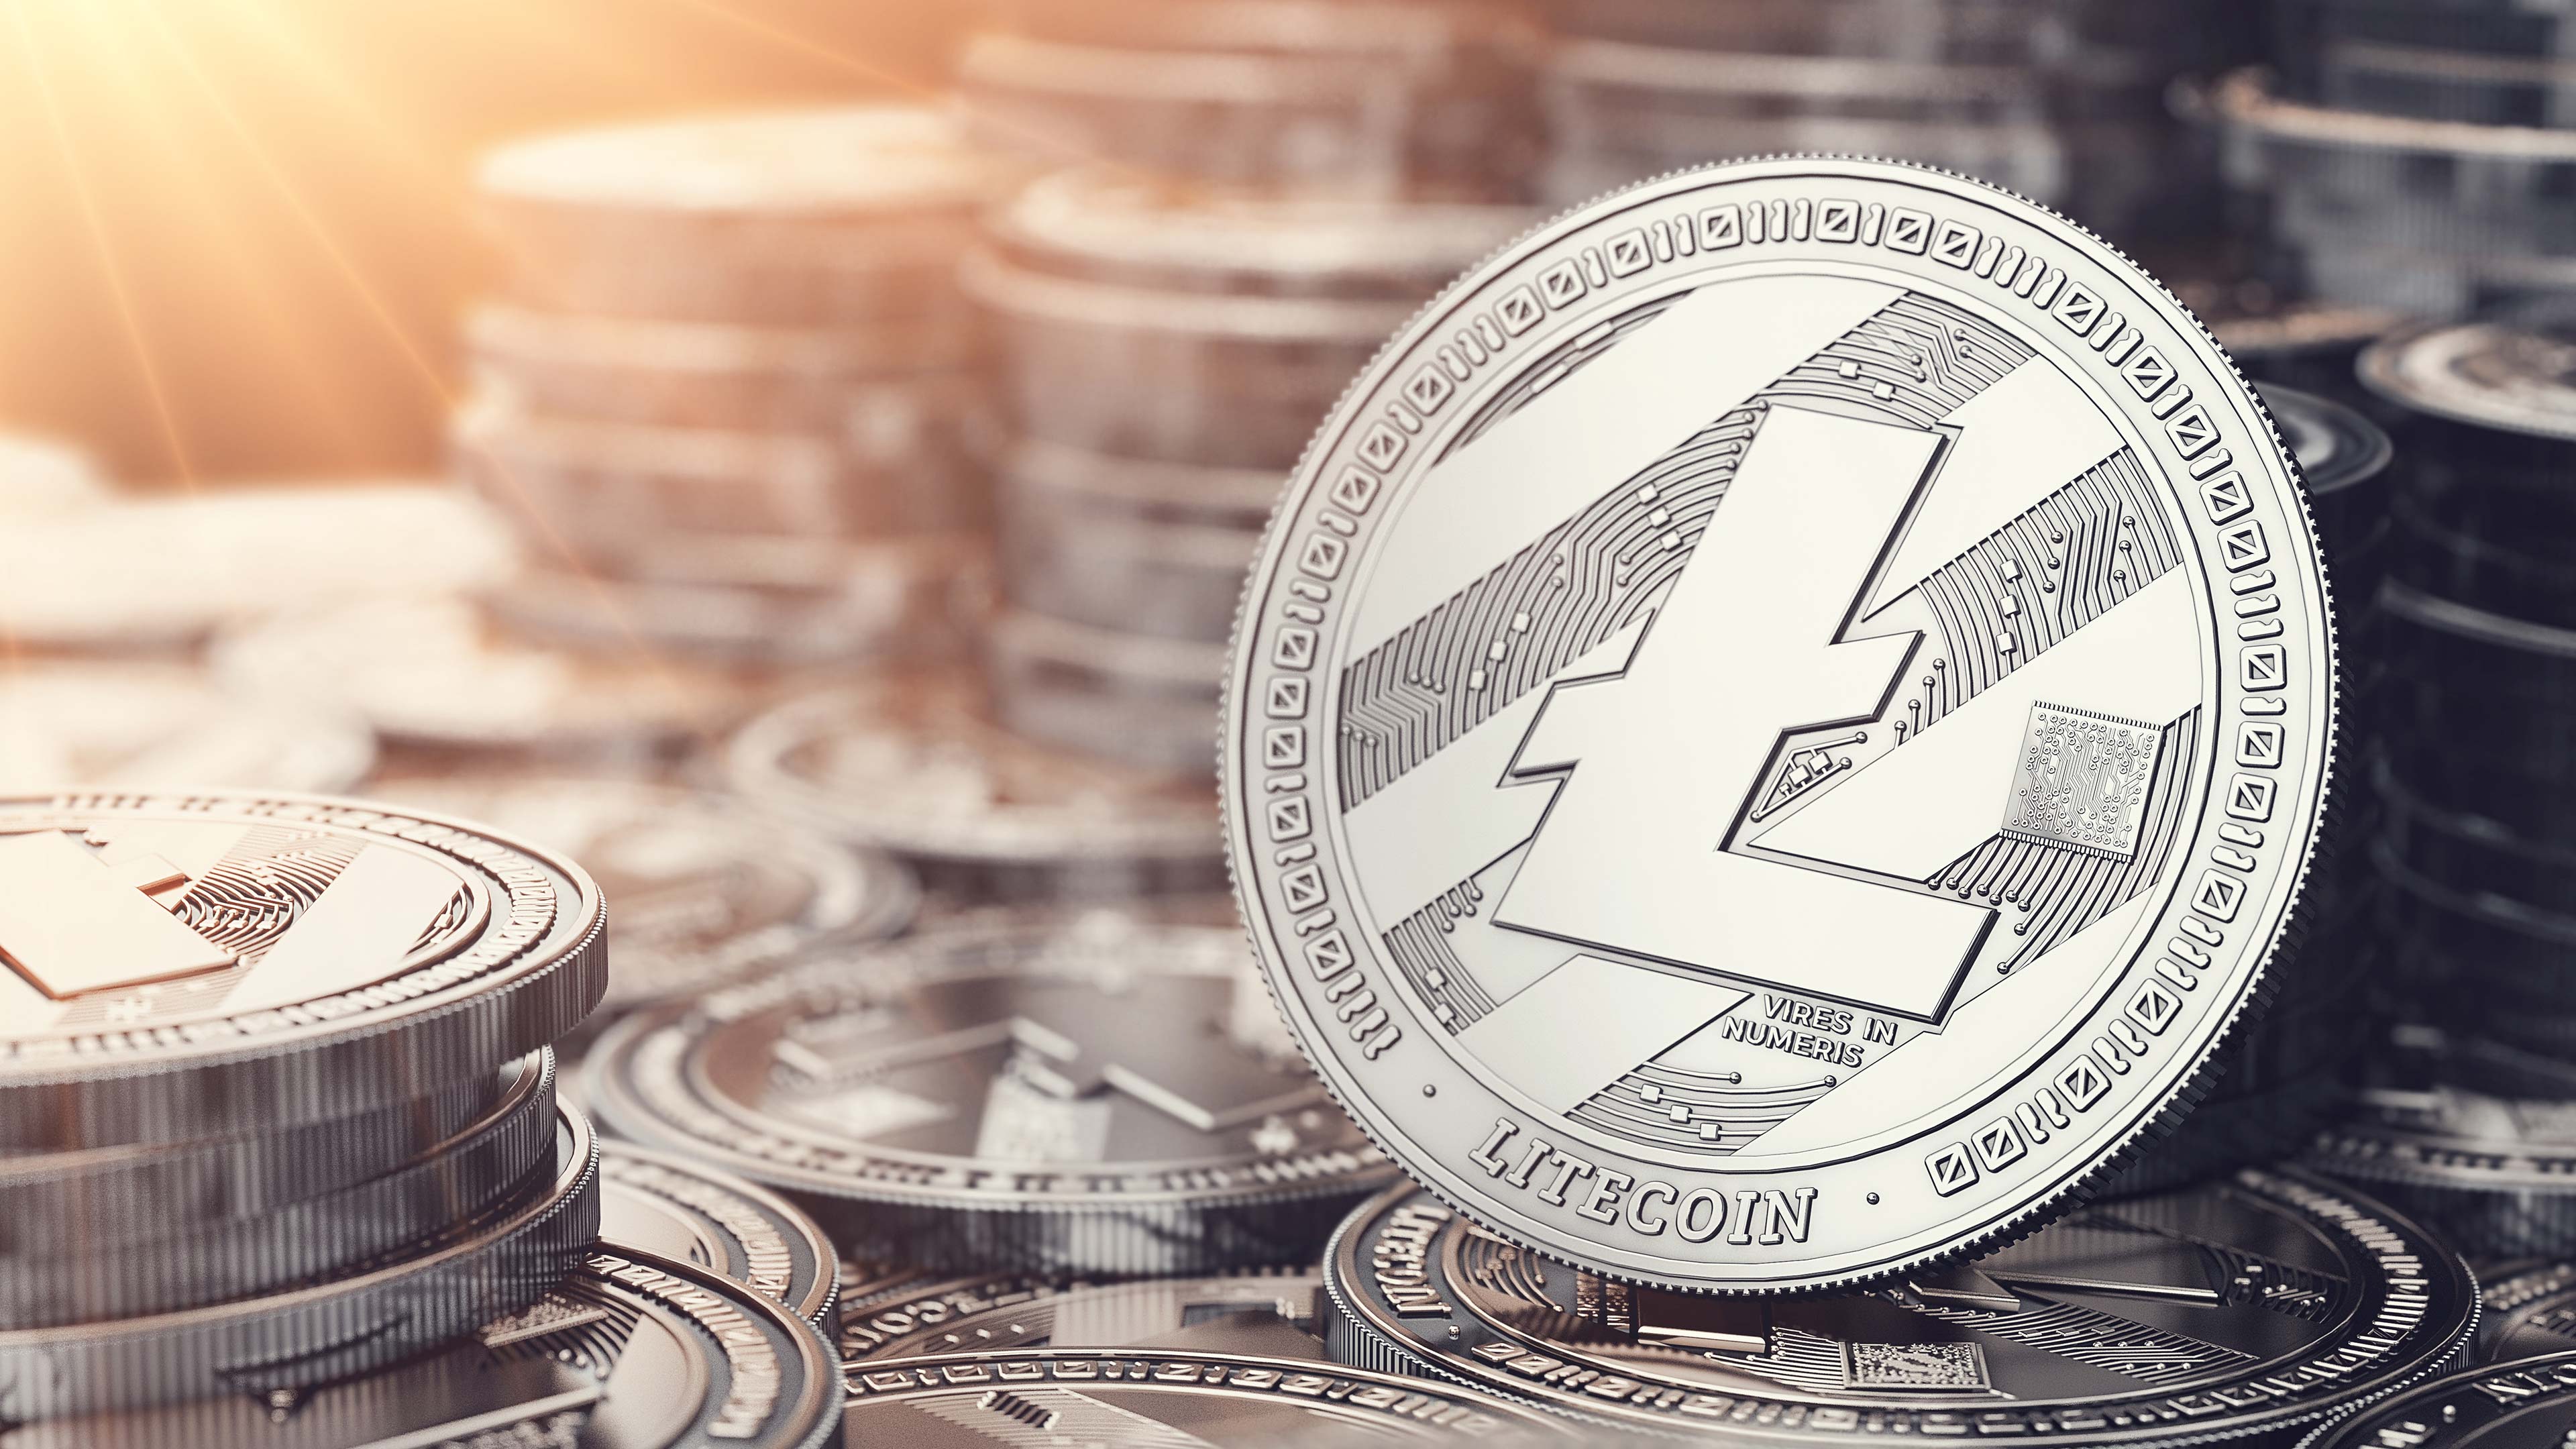 Top cryptocurrency listed — Litecoin